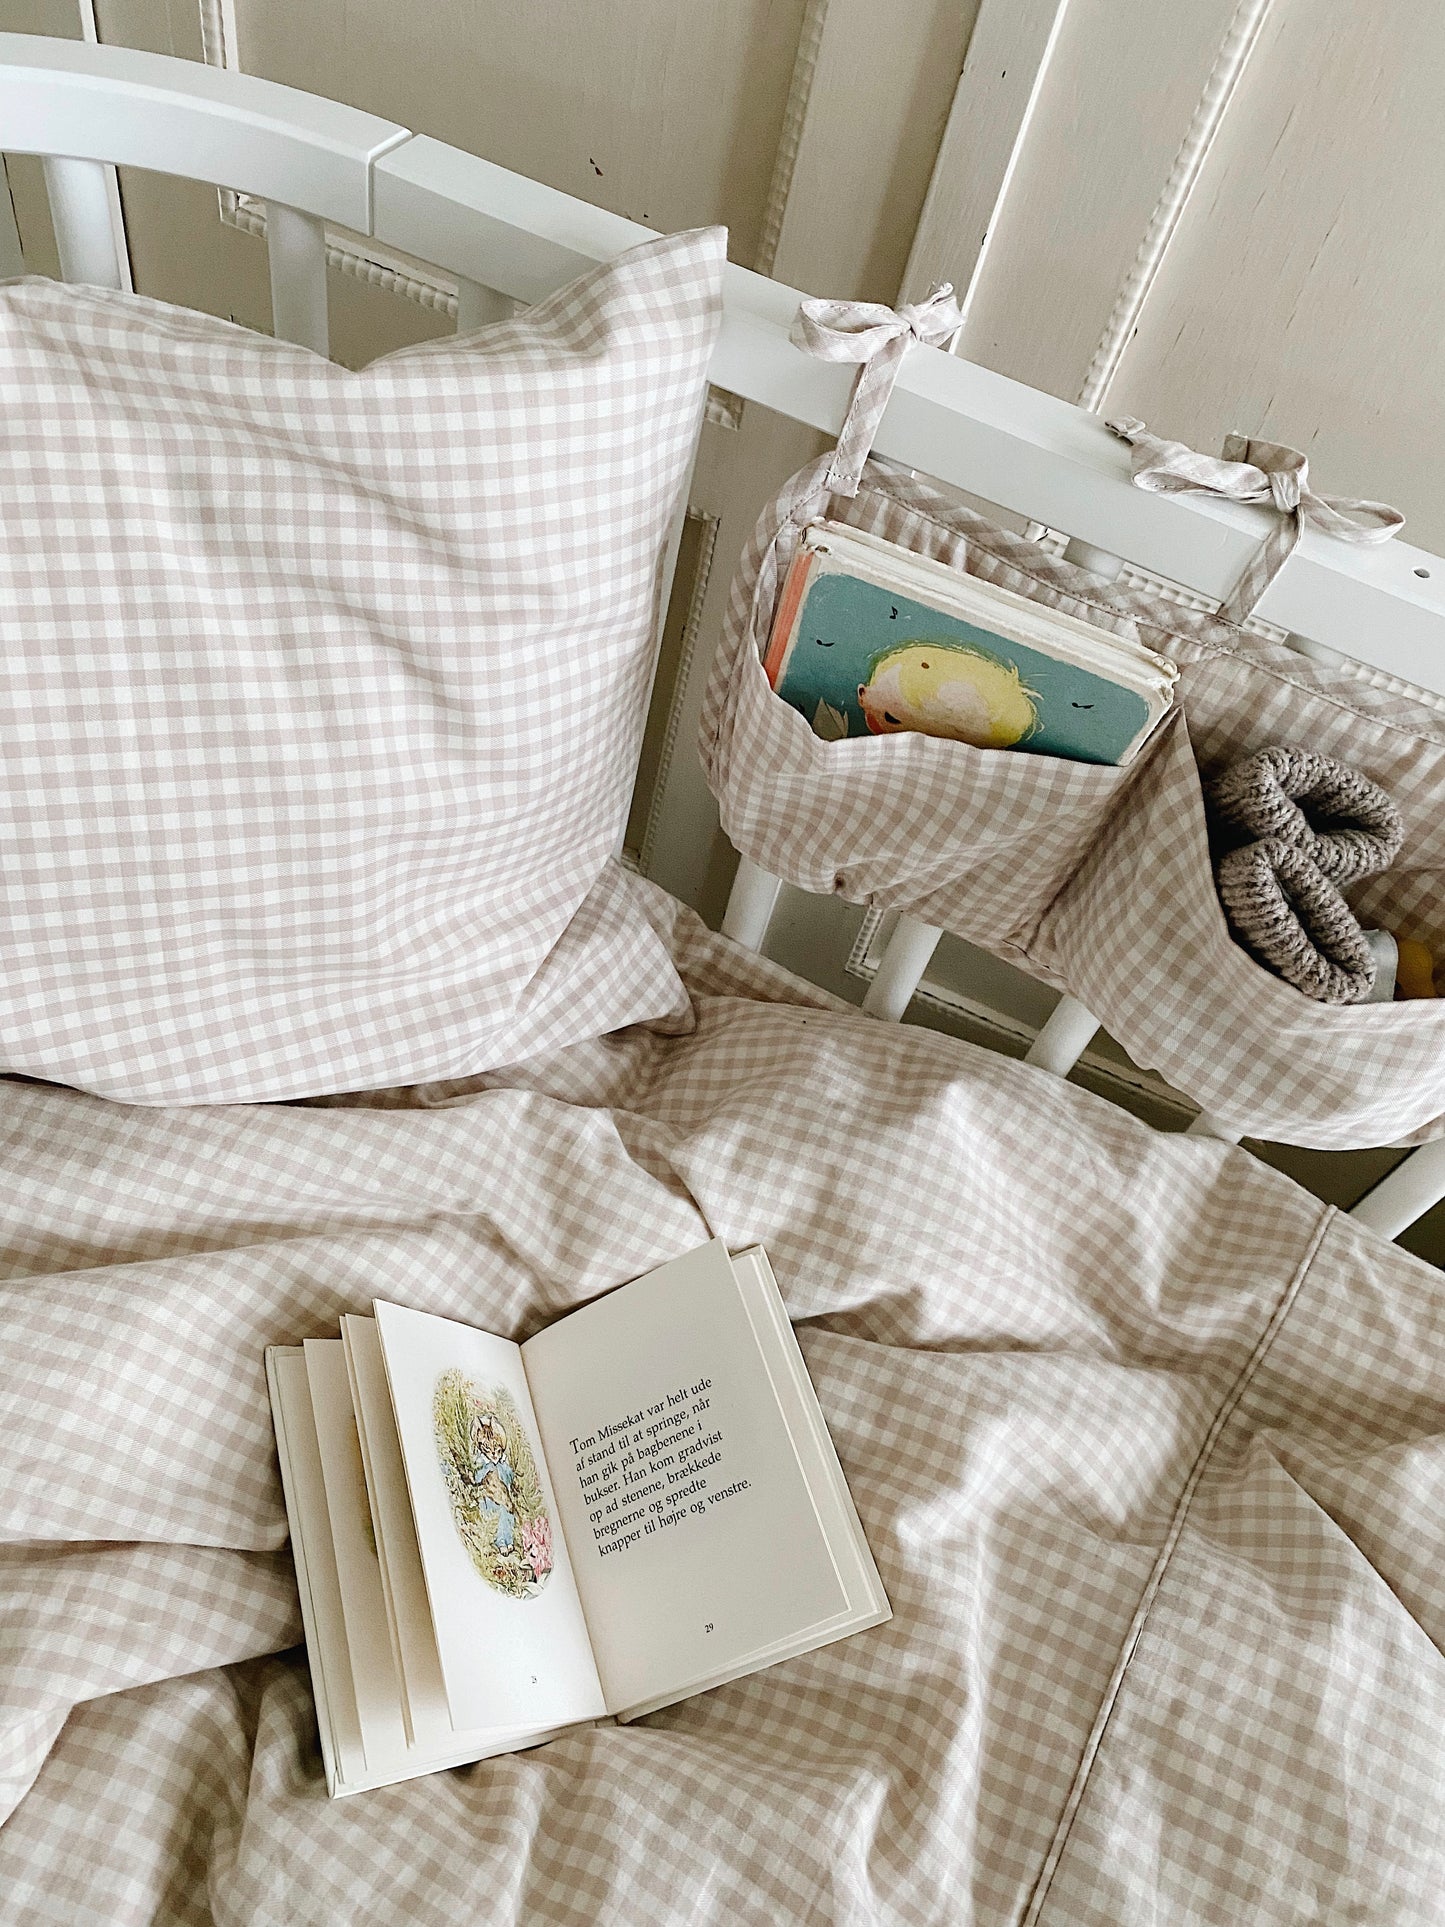 Lalaby - Baby bedding - Beige gingham